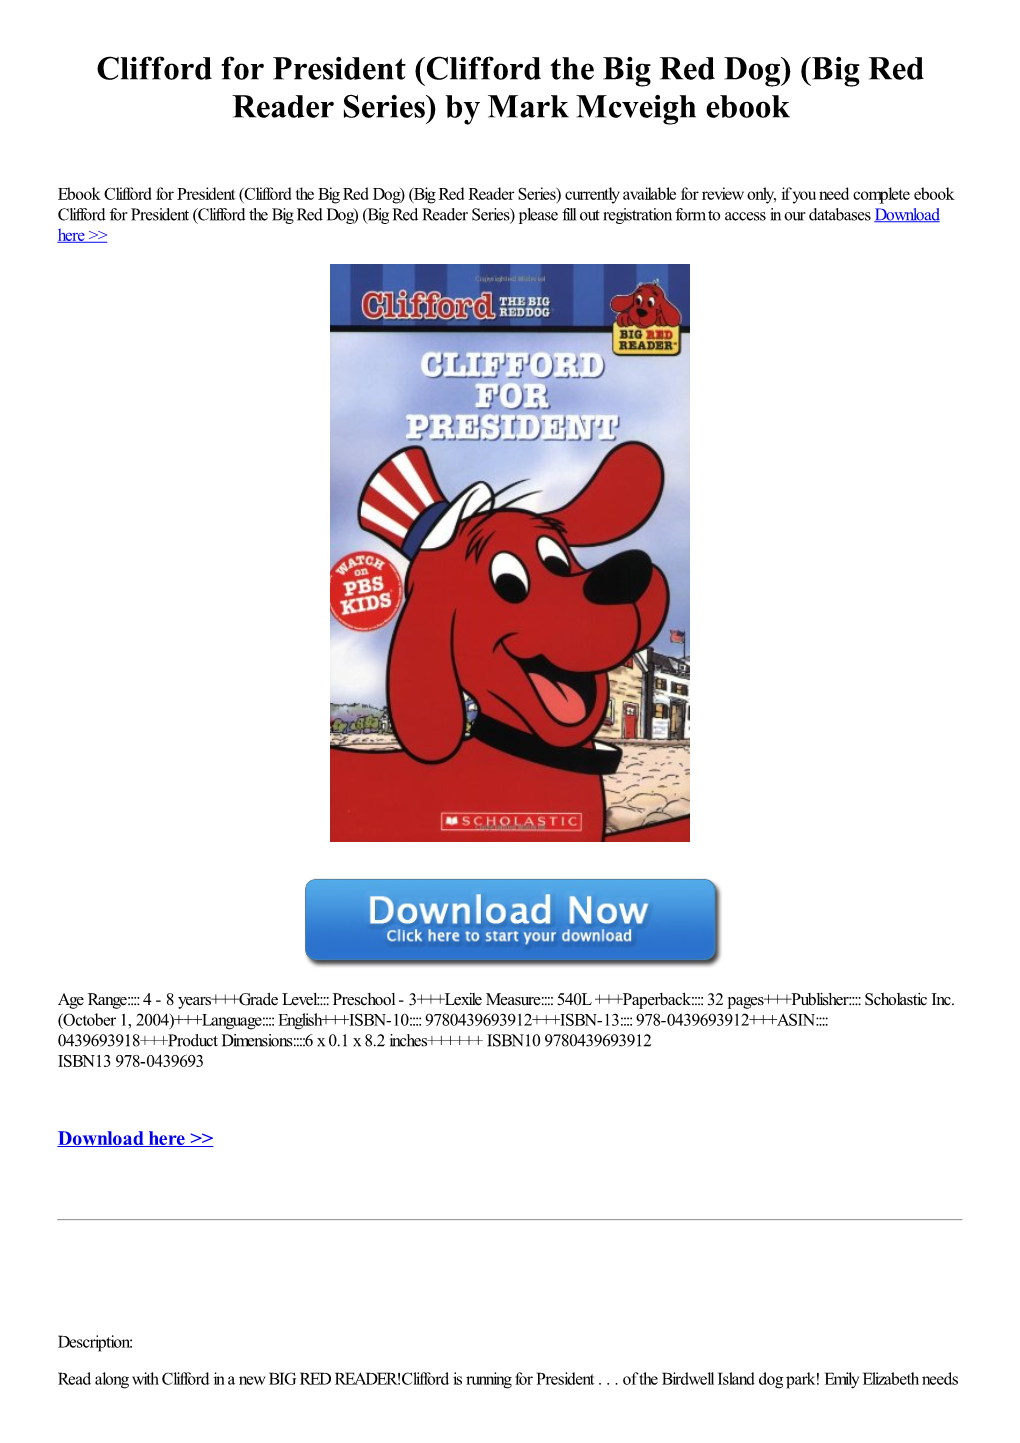 Clifford the Big Red Dog) (Big Red Reader Series) by Mark Mcveigh Ebook